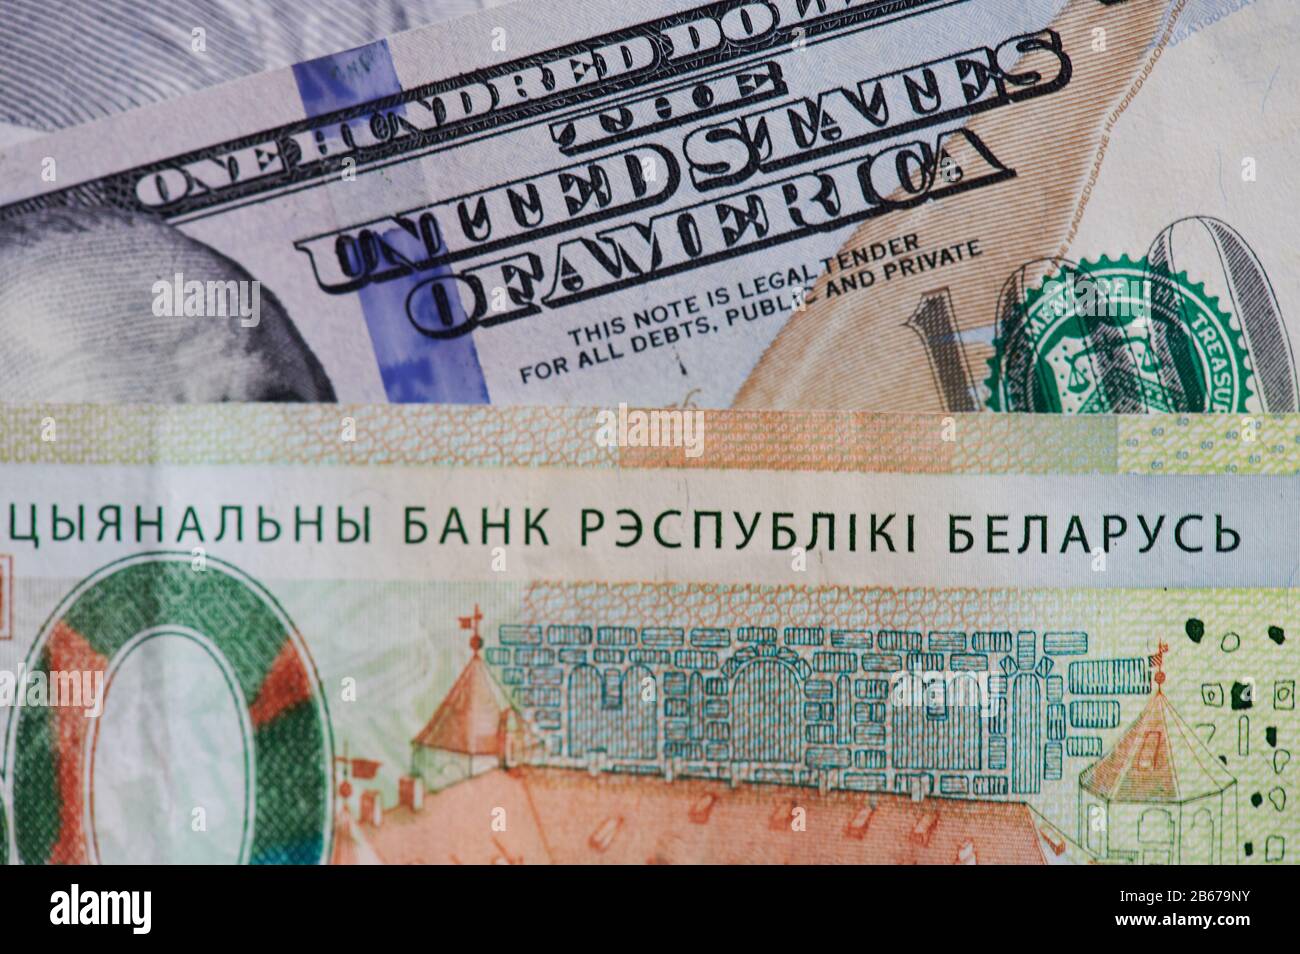 Belarusian and usa money banknote close up view Stock Photo